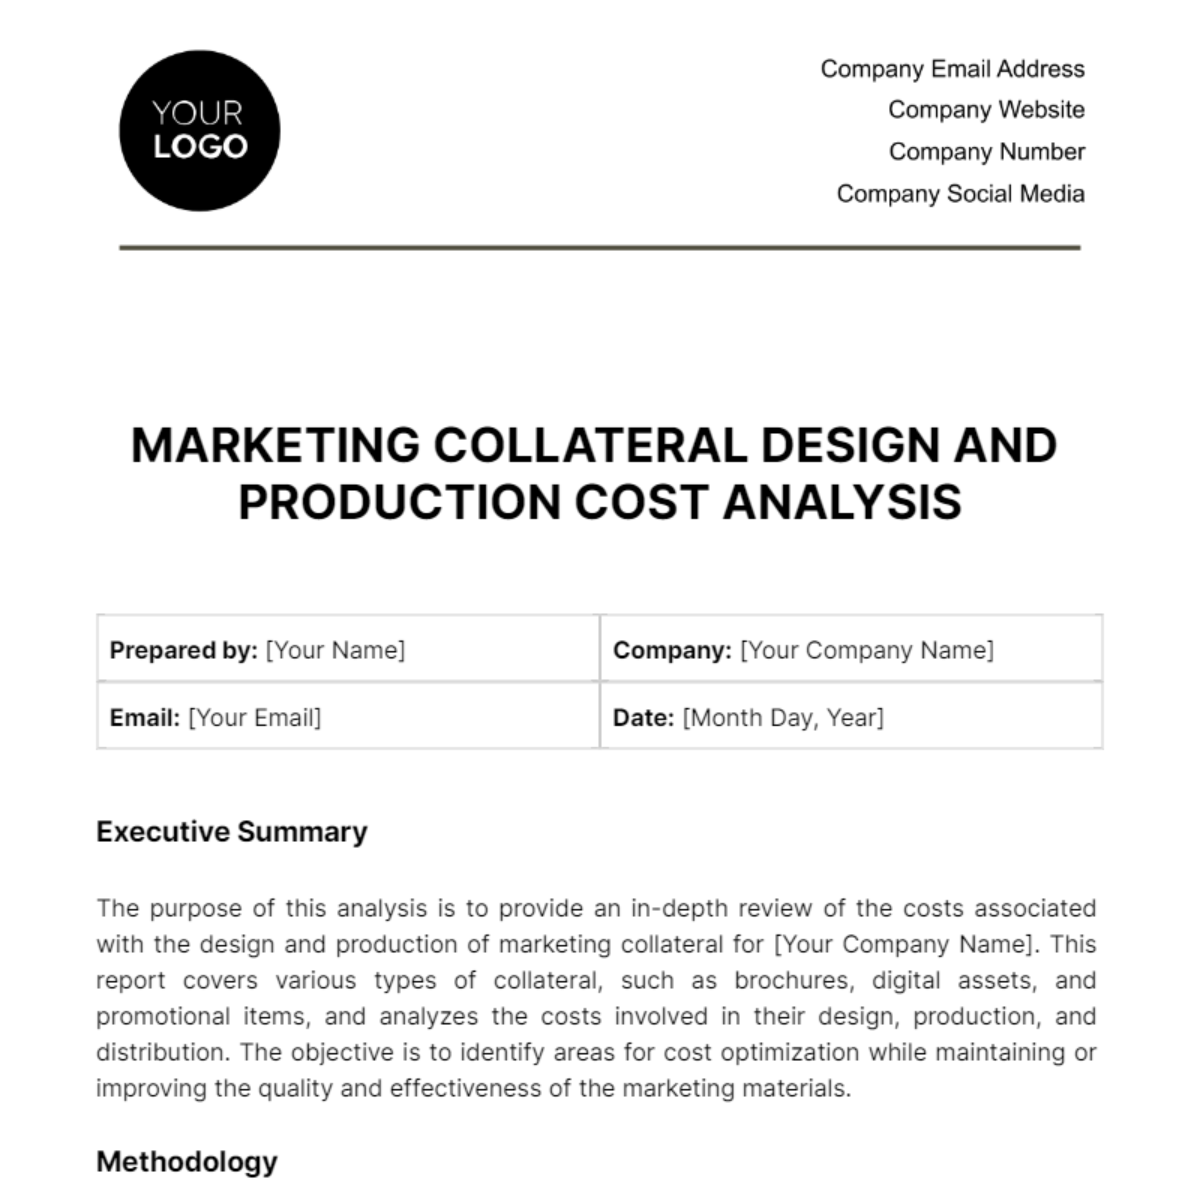 Free Marketing Collateral Design and Production Cost Analysis Template